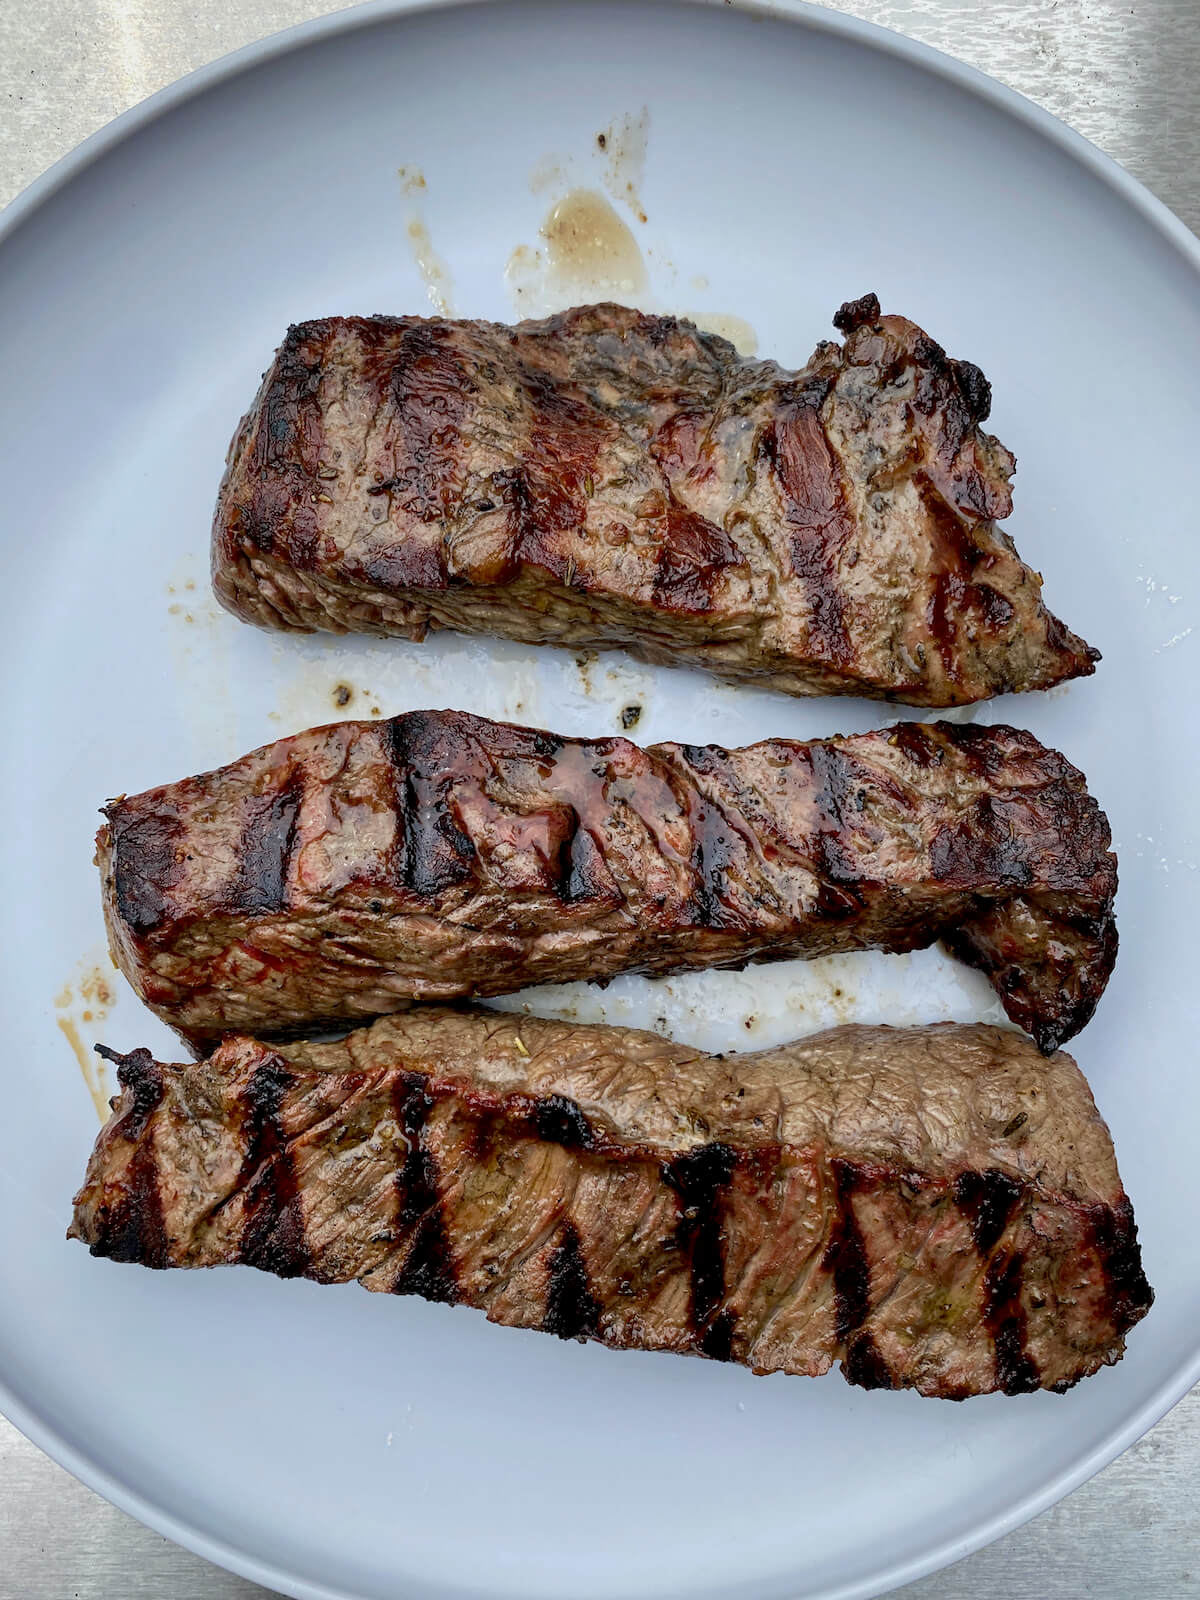 Strips of grilled sirloin steak tips resting on a gray plate.